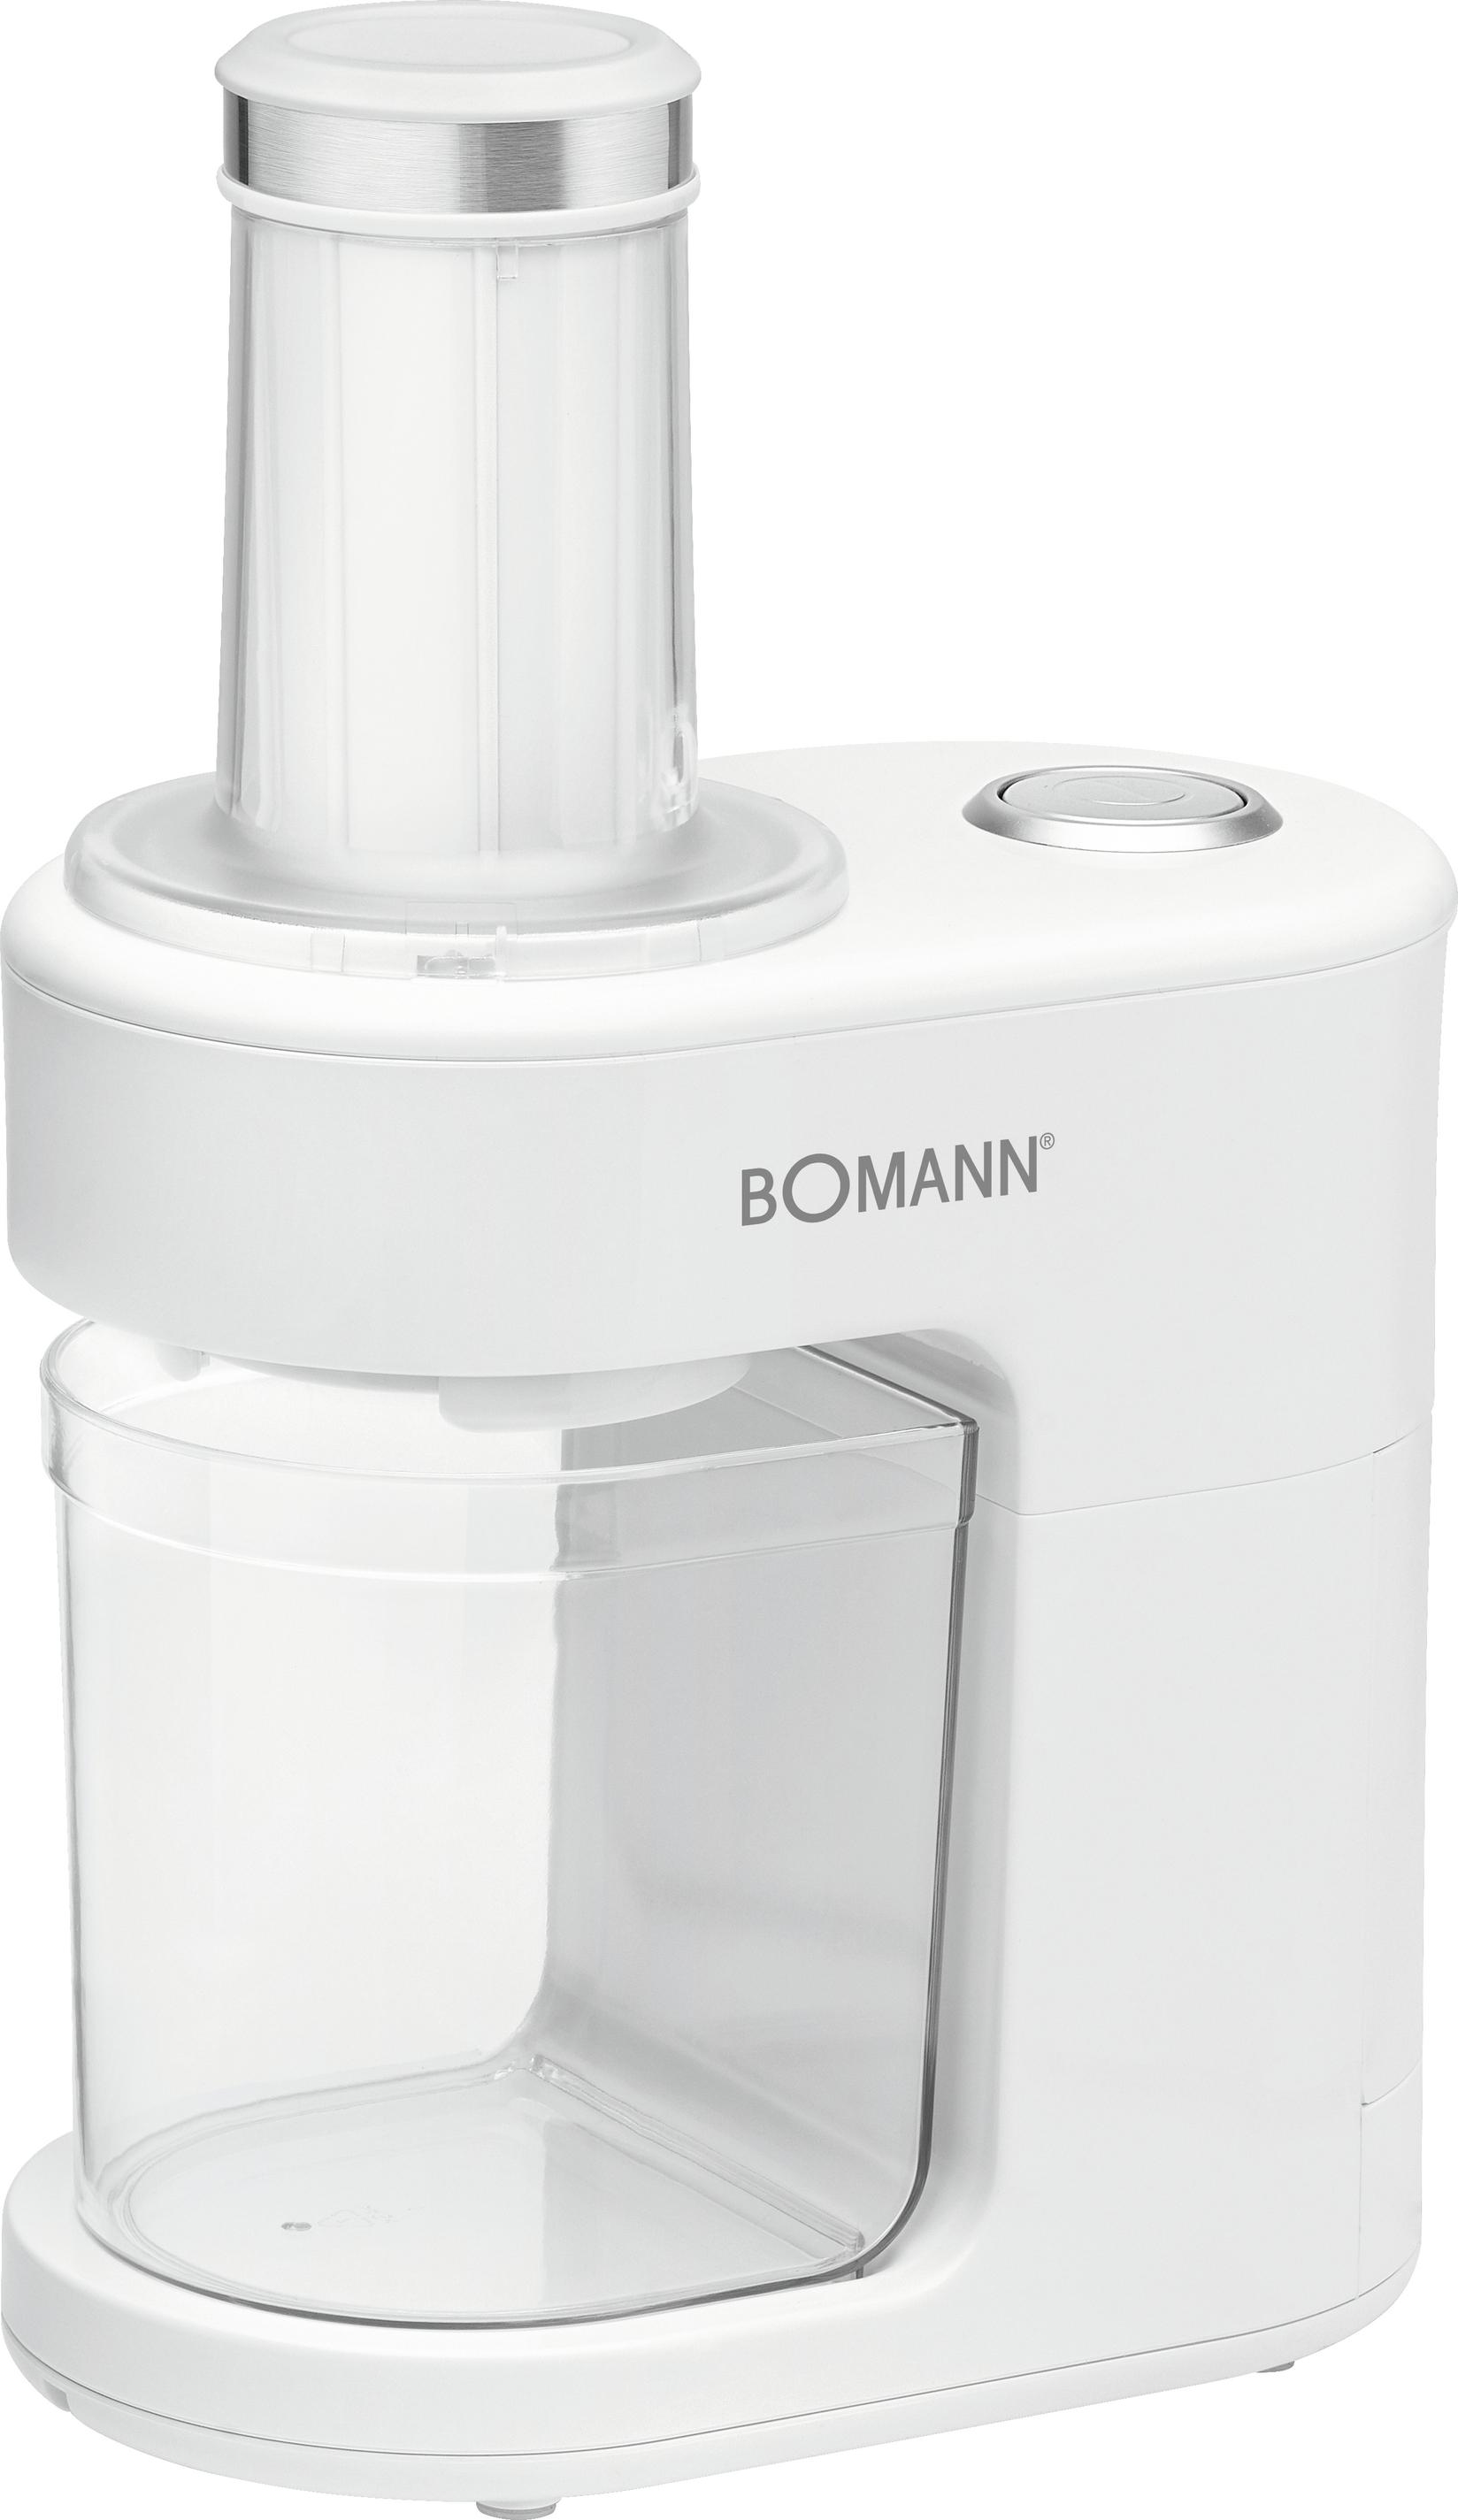 Selected image for Bomann ME 470 CB 80 W Belo